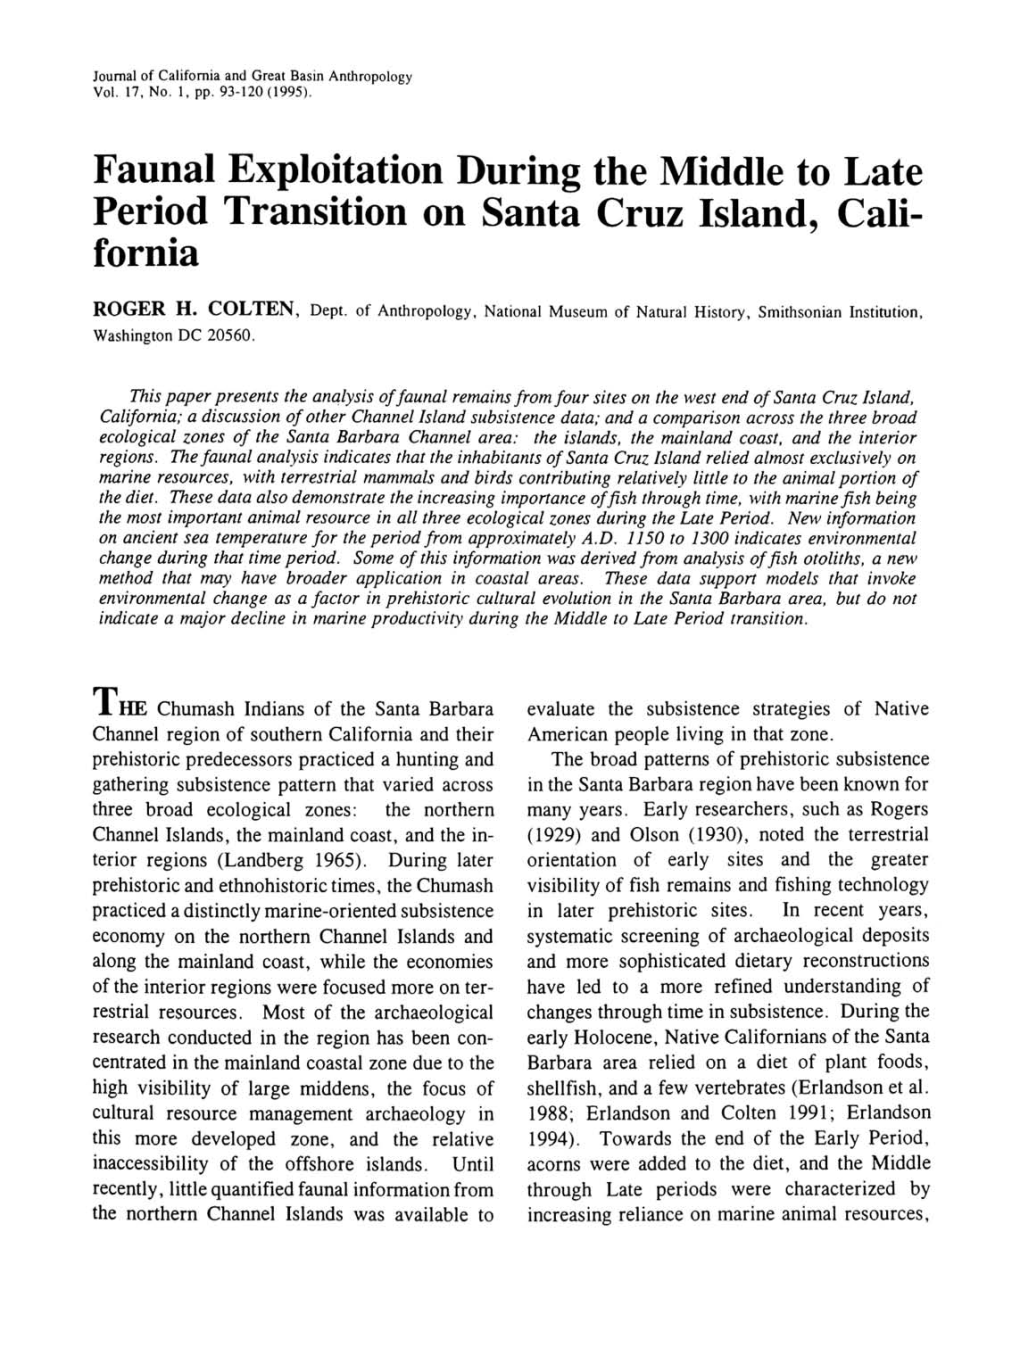 Faunal Exploitation During the Middle to Late Period Transition on Santa Cruz Island, Cali­ Fornia